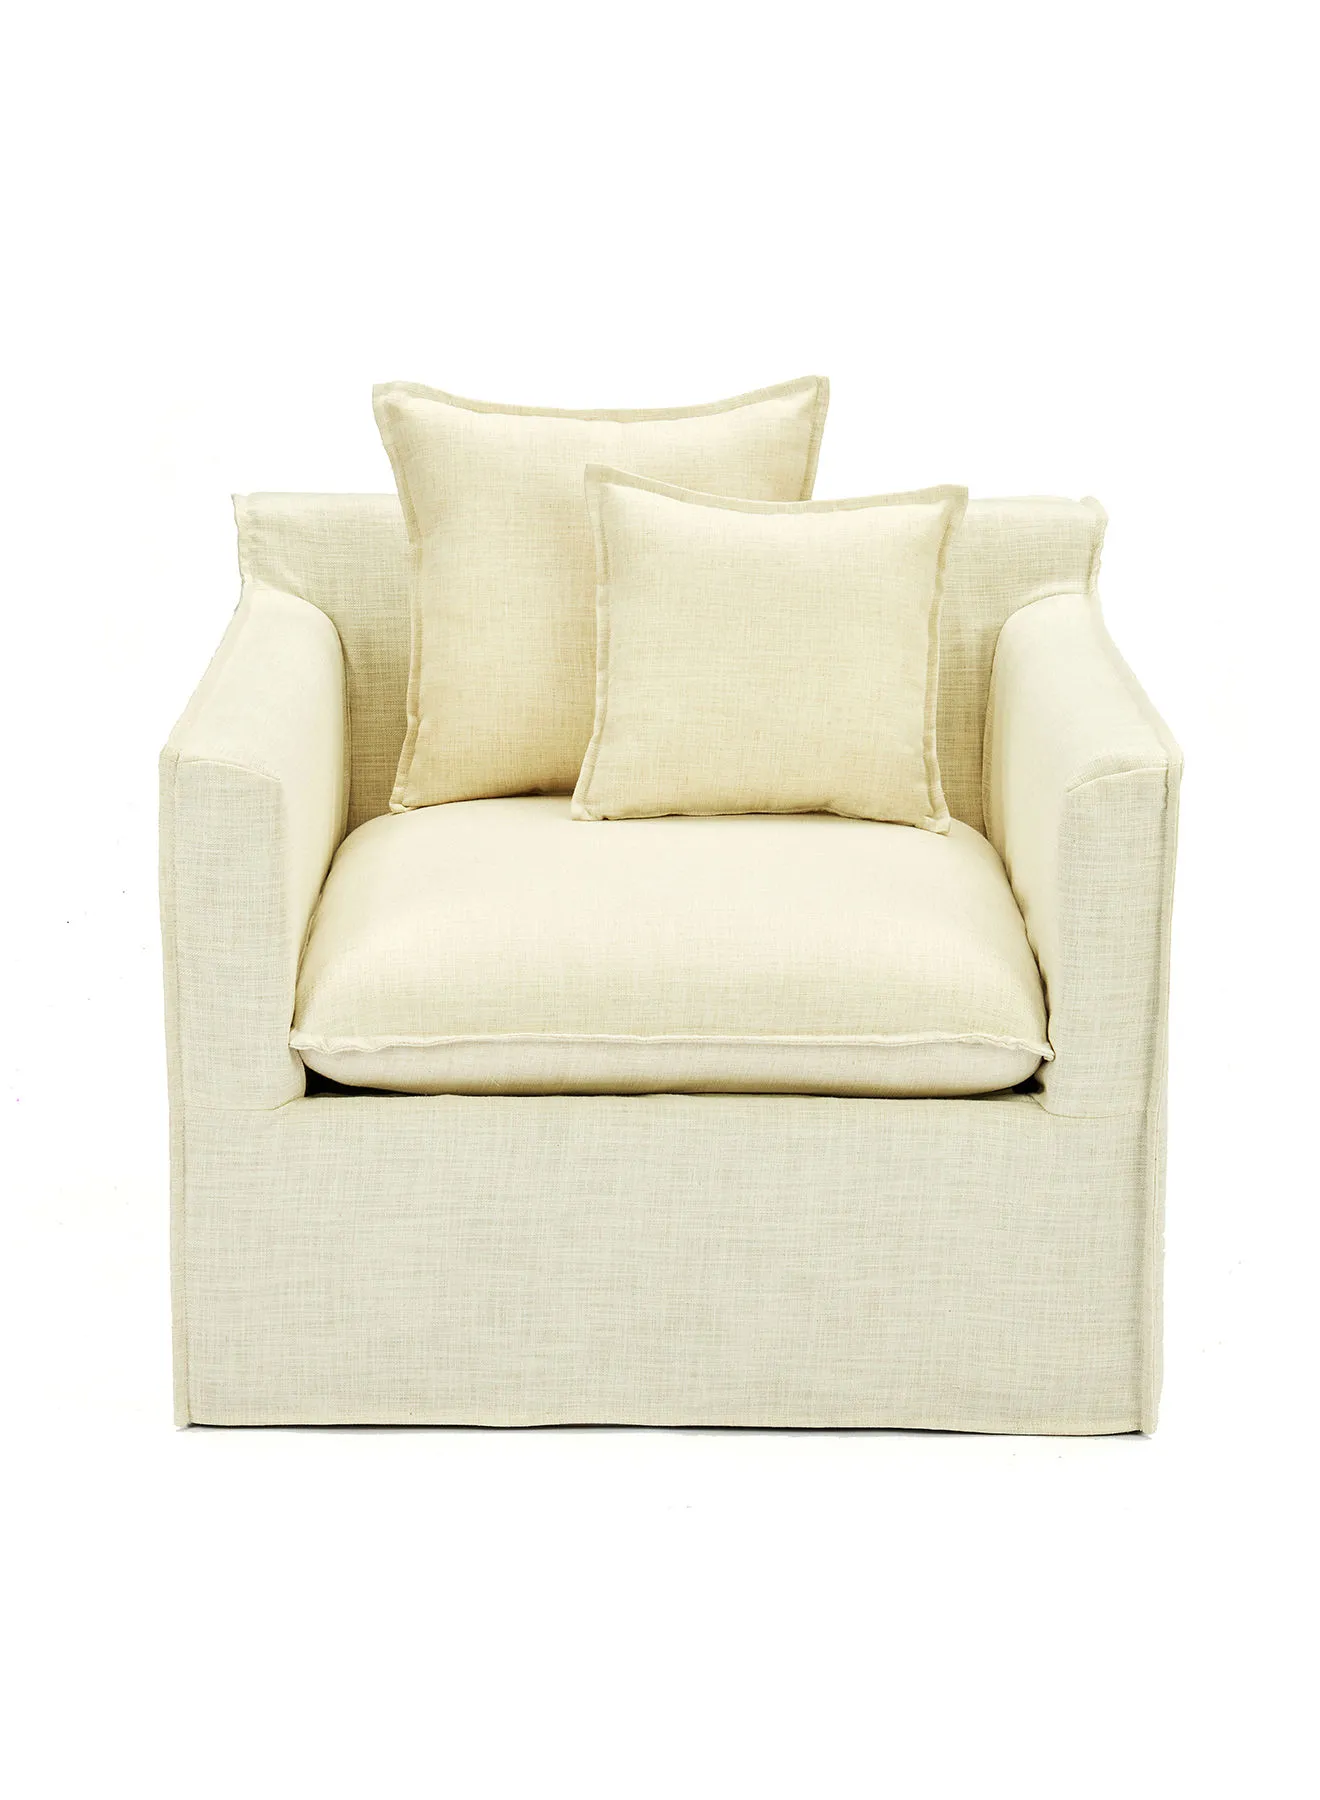 ebb & flow Armchair Luxurious - Upholstered Fabric Off White Wood Couch - 940 X 1020 X 890 - Relaxing Sofa